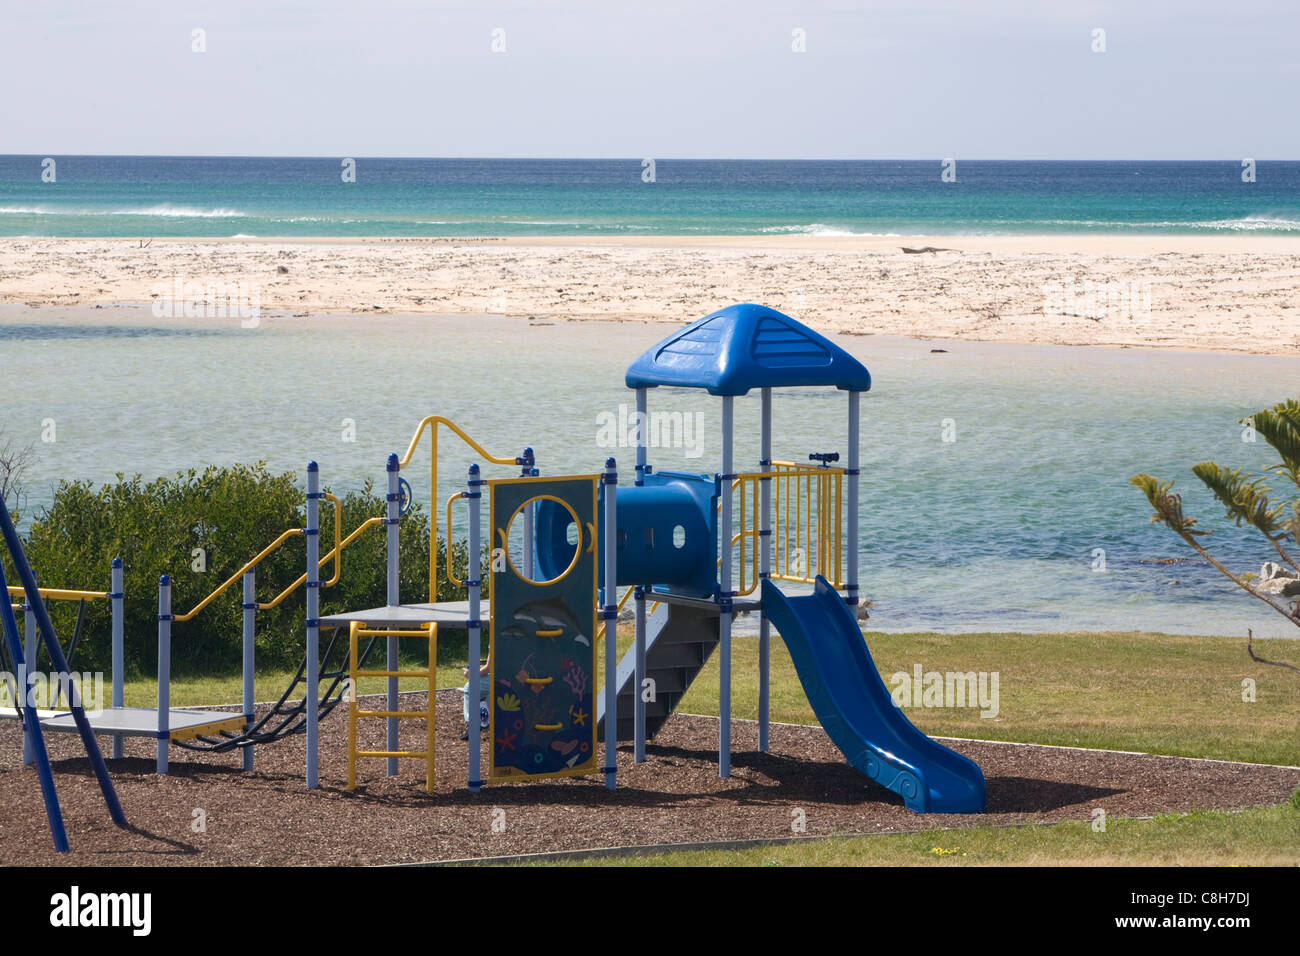 Childrens playground by the coast in Queensland,Australia Stock Photo